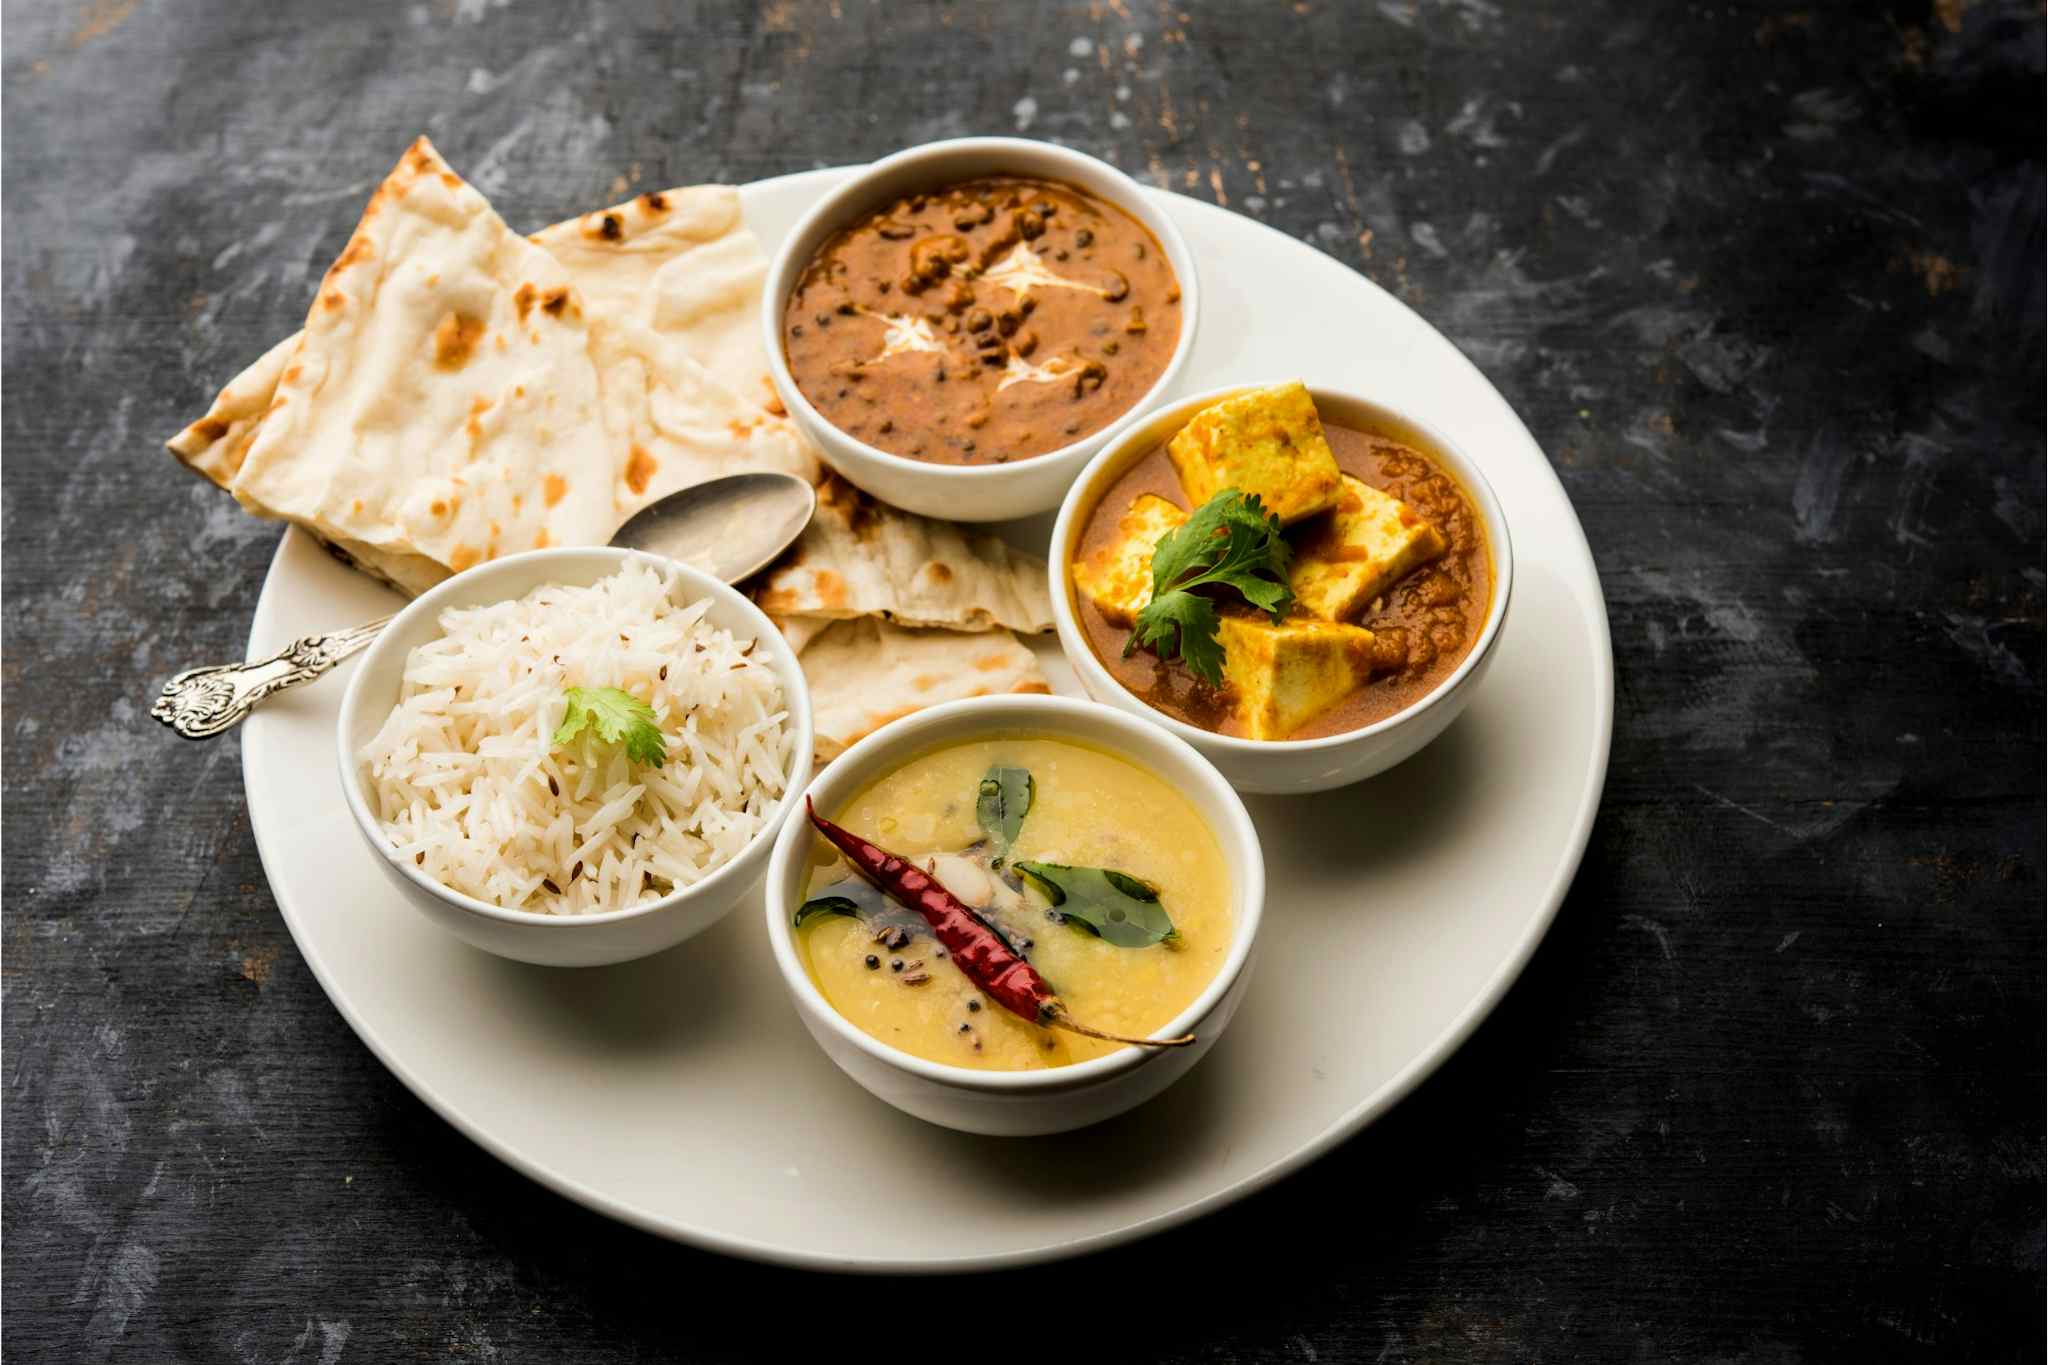 North Indian food - Canva link: https://www.canva.com/photos/MADYlw9mBBs-north-indian-food-platter-or-thali/